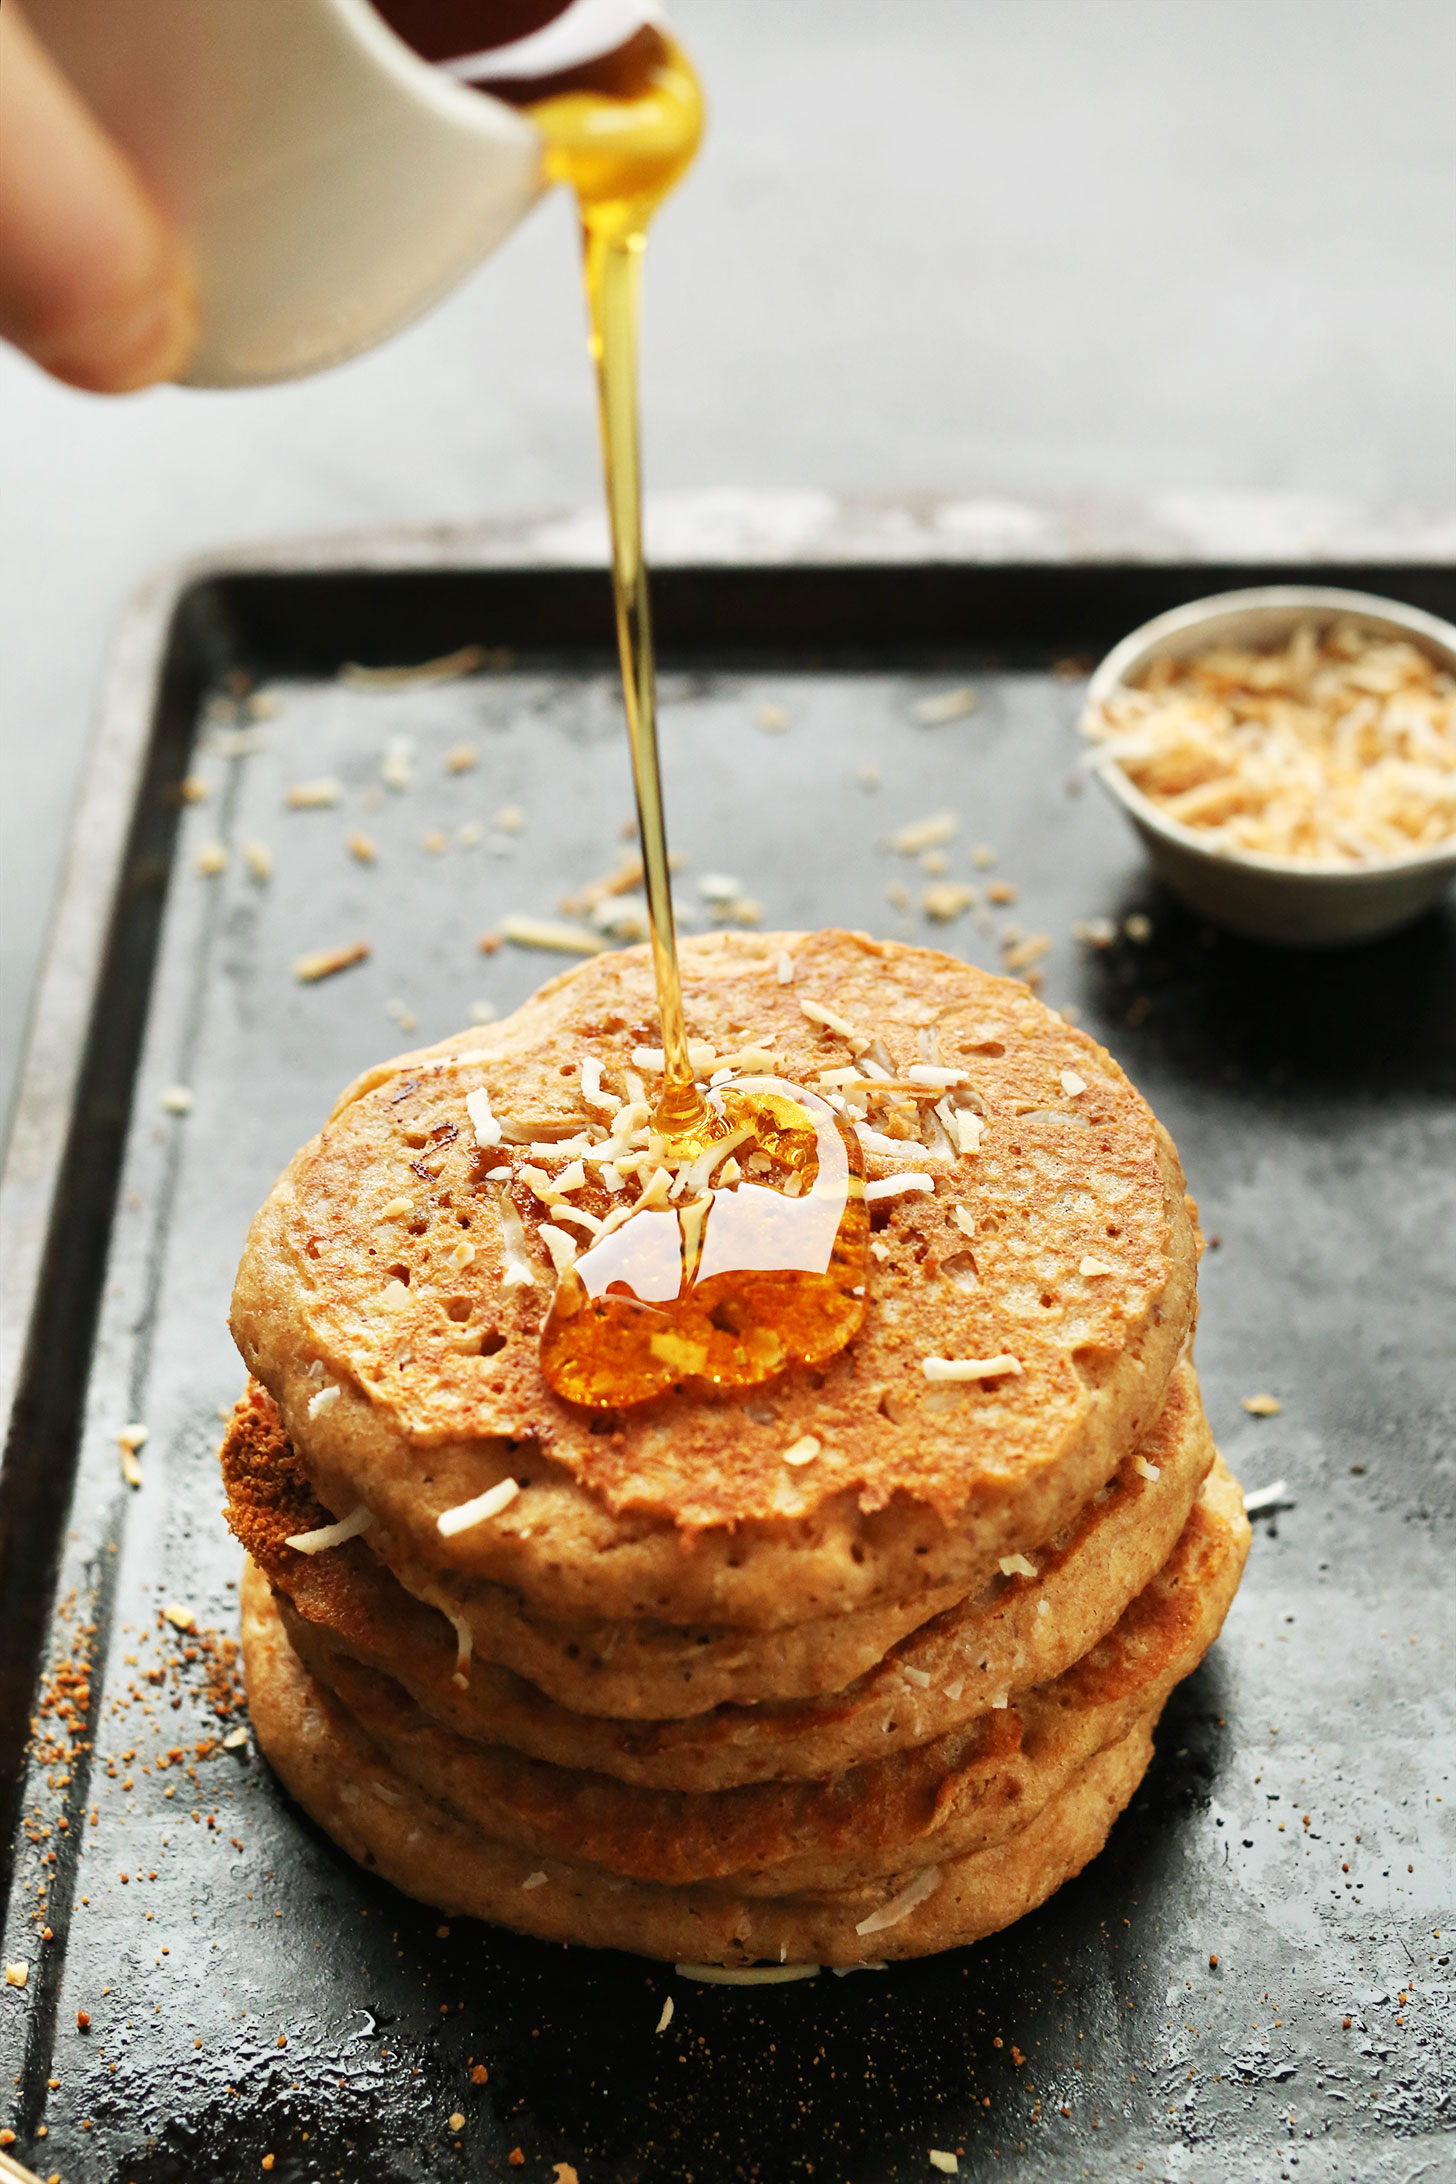 Amazing-vegan-toasted-coconut-pancakes-aka-better-than-sex-pancakes-so-delicious-fluffy-and-coconutty.-vegan-breakfast-pancakes-recipe-minimalistbaker